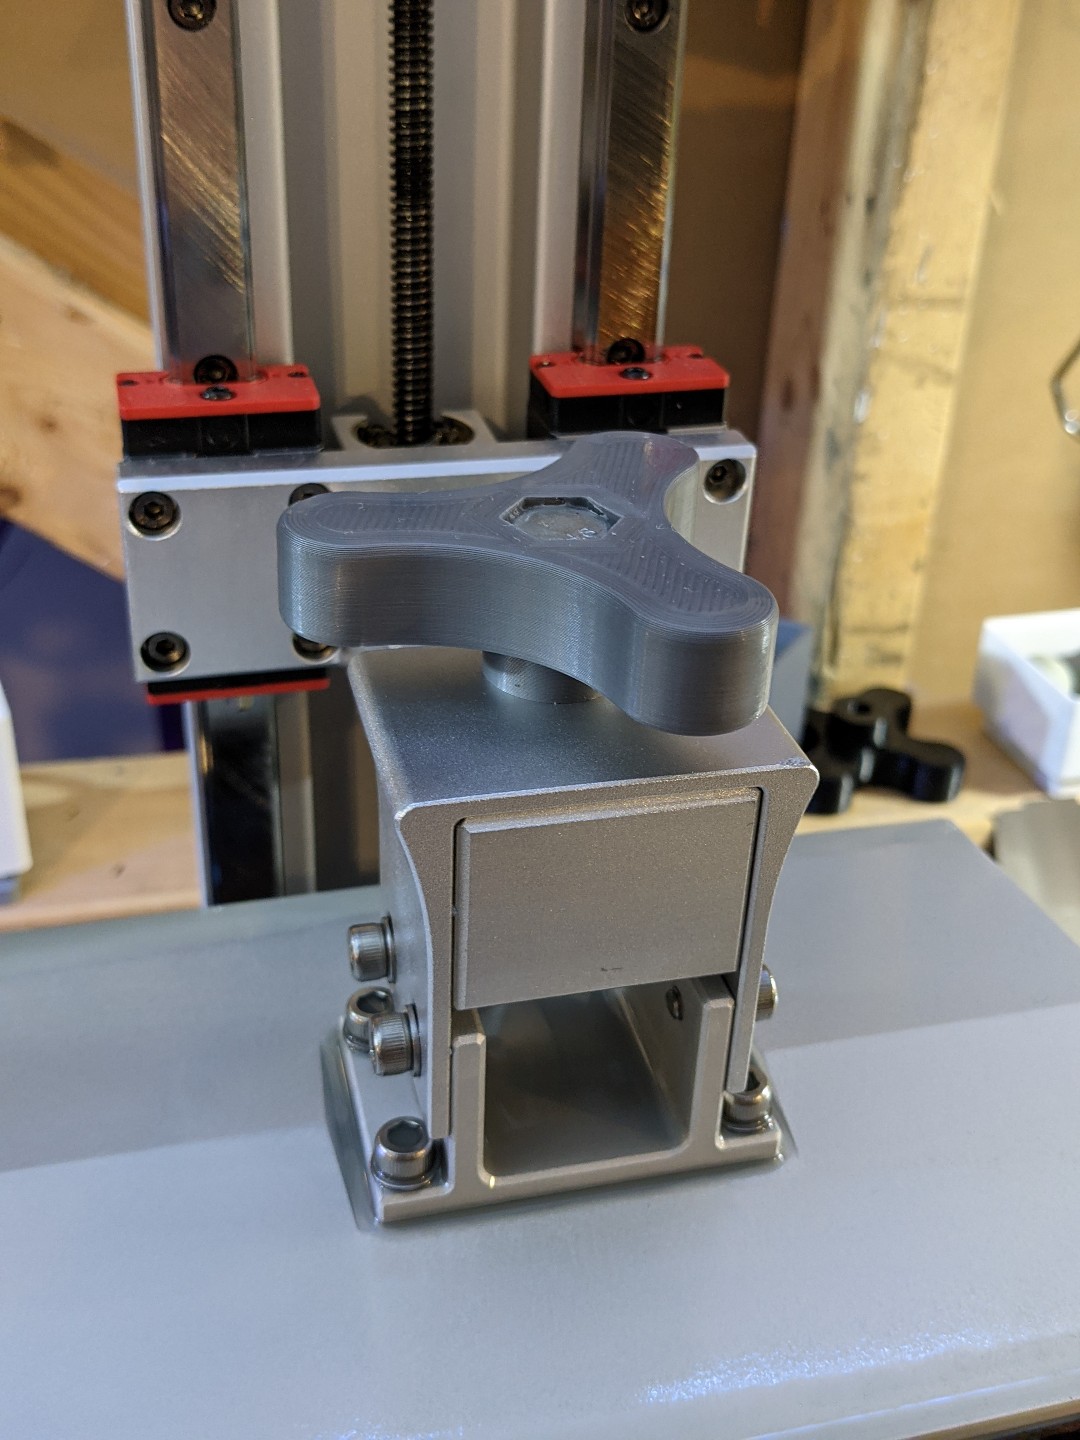 Knob for Anycubic Photon Mono X Build Plate